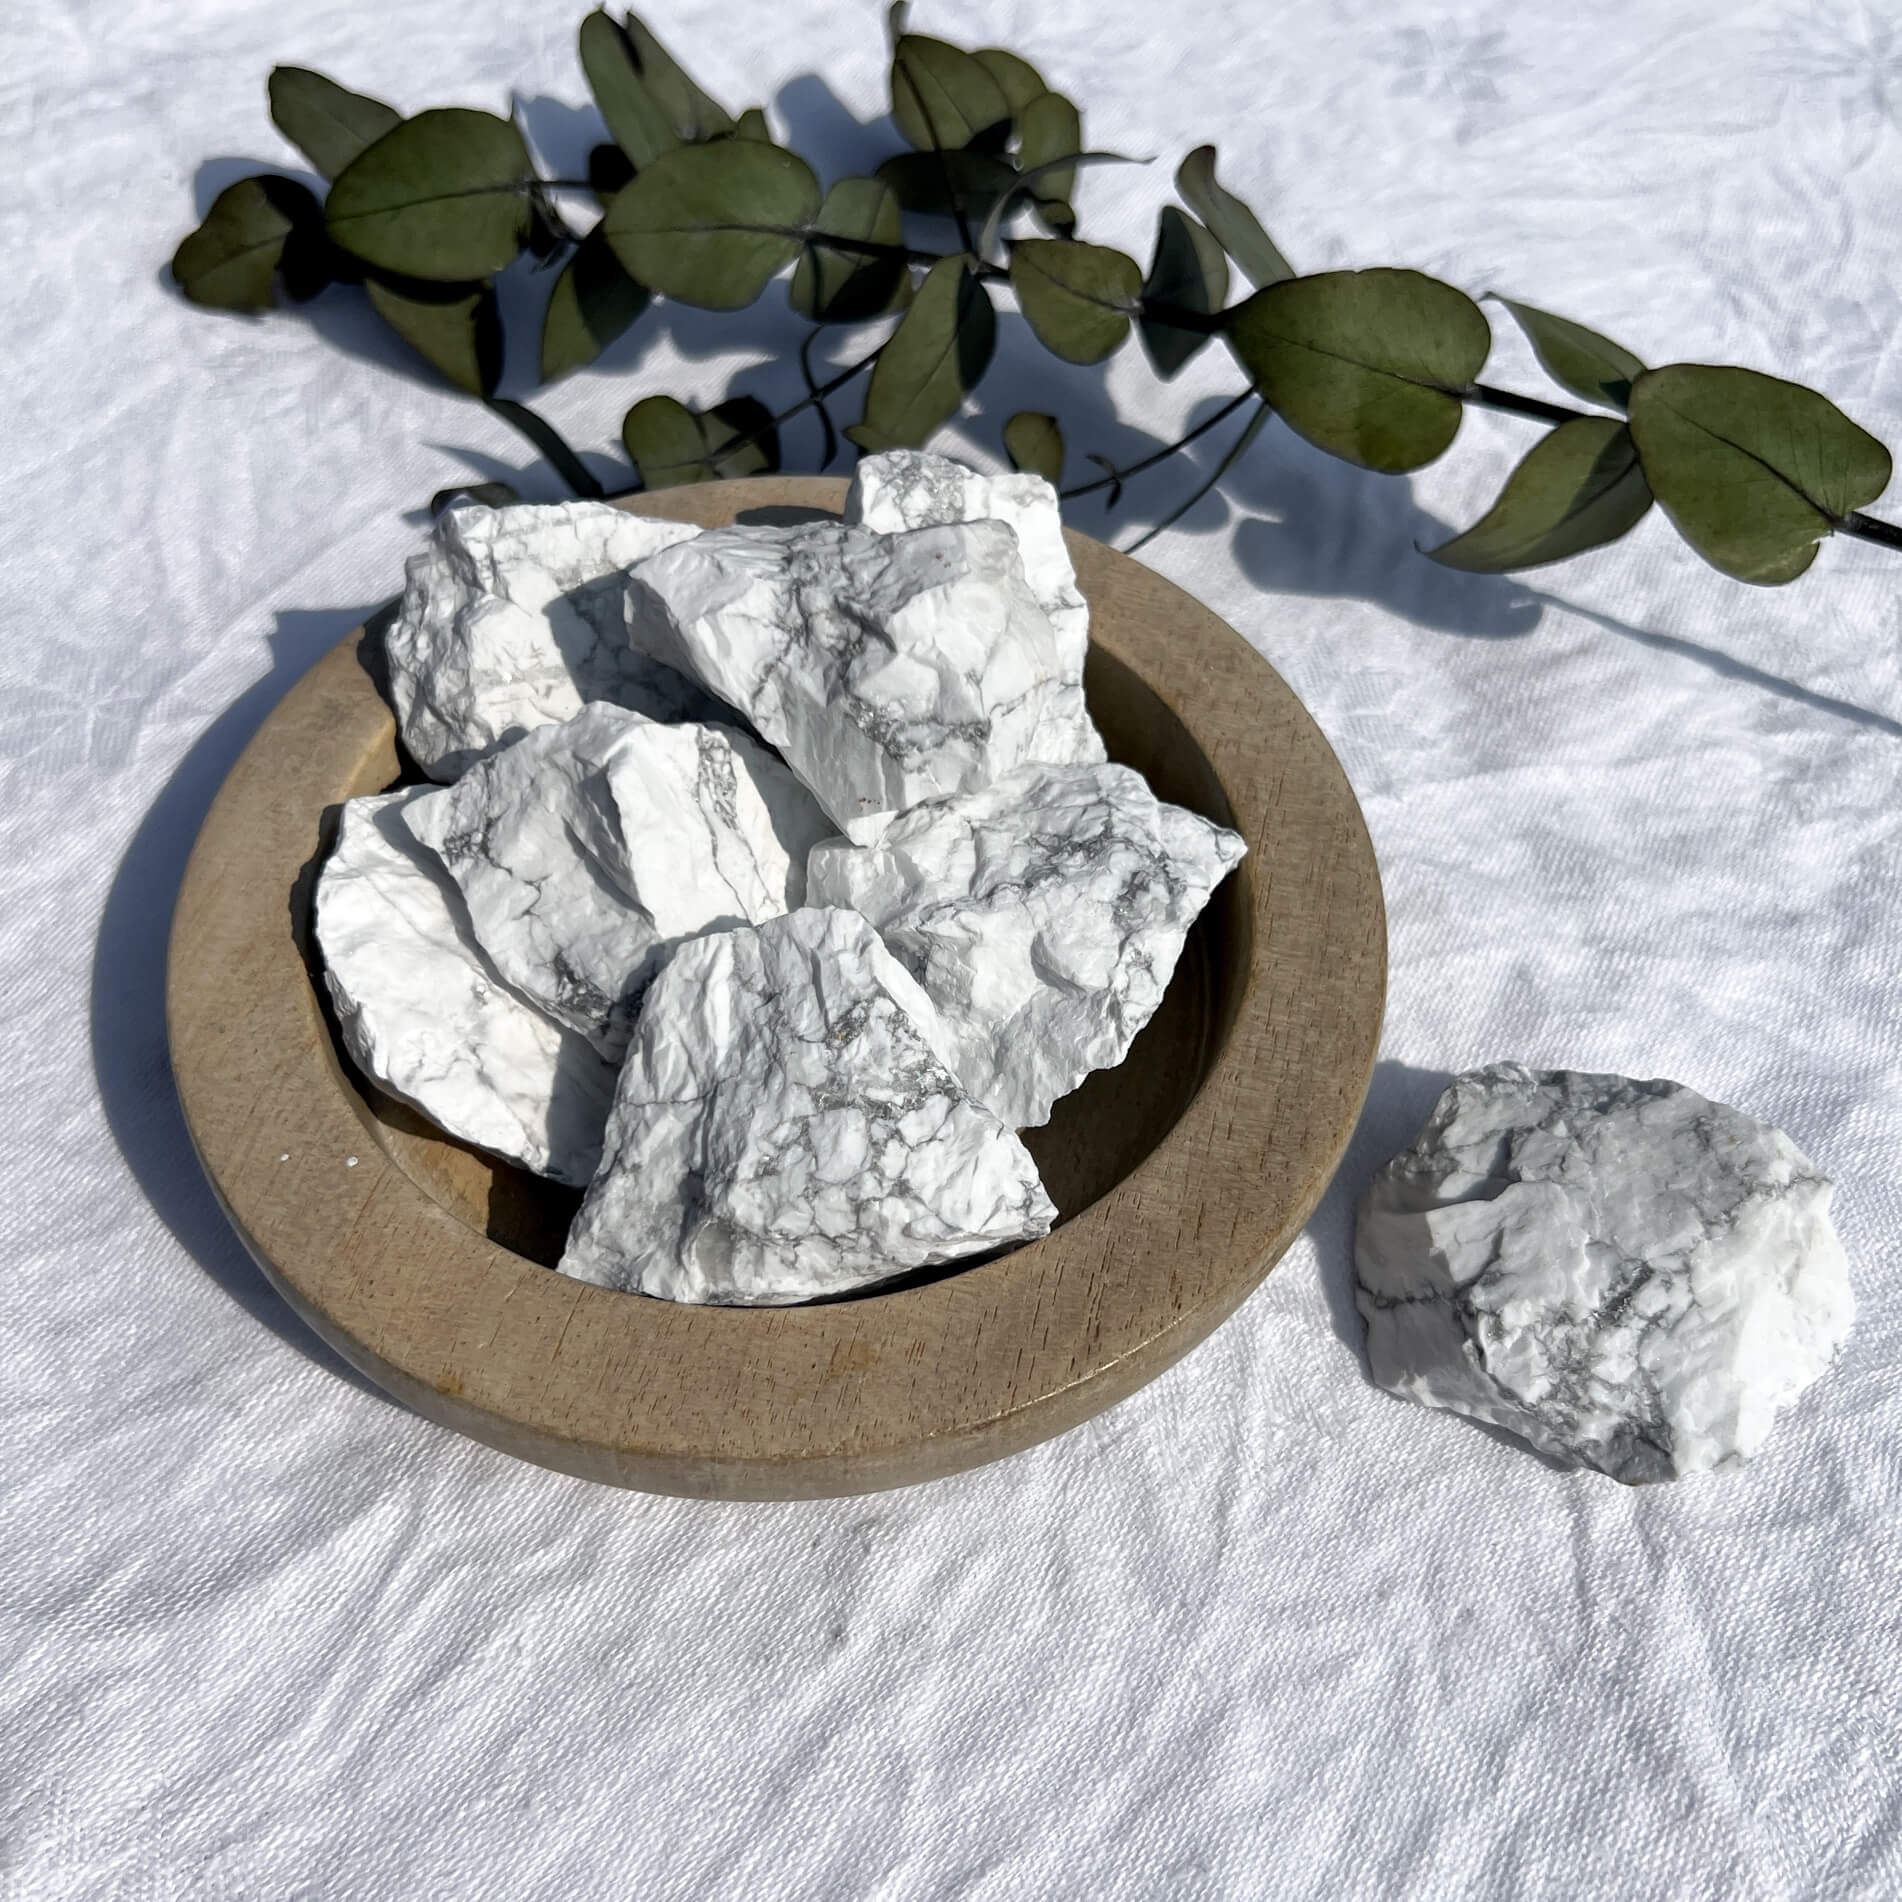 A wooden bowl filled with white and grey marbled howlite crystal chunks